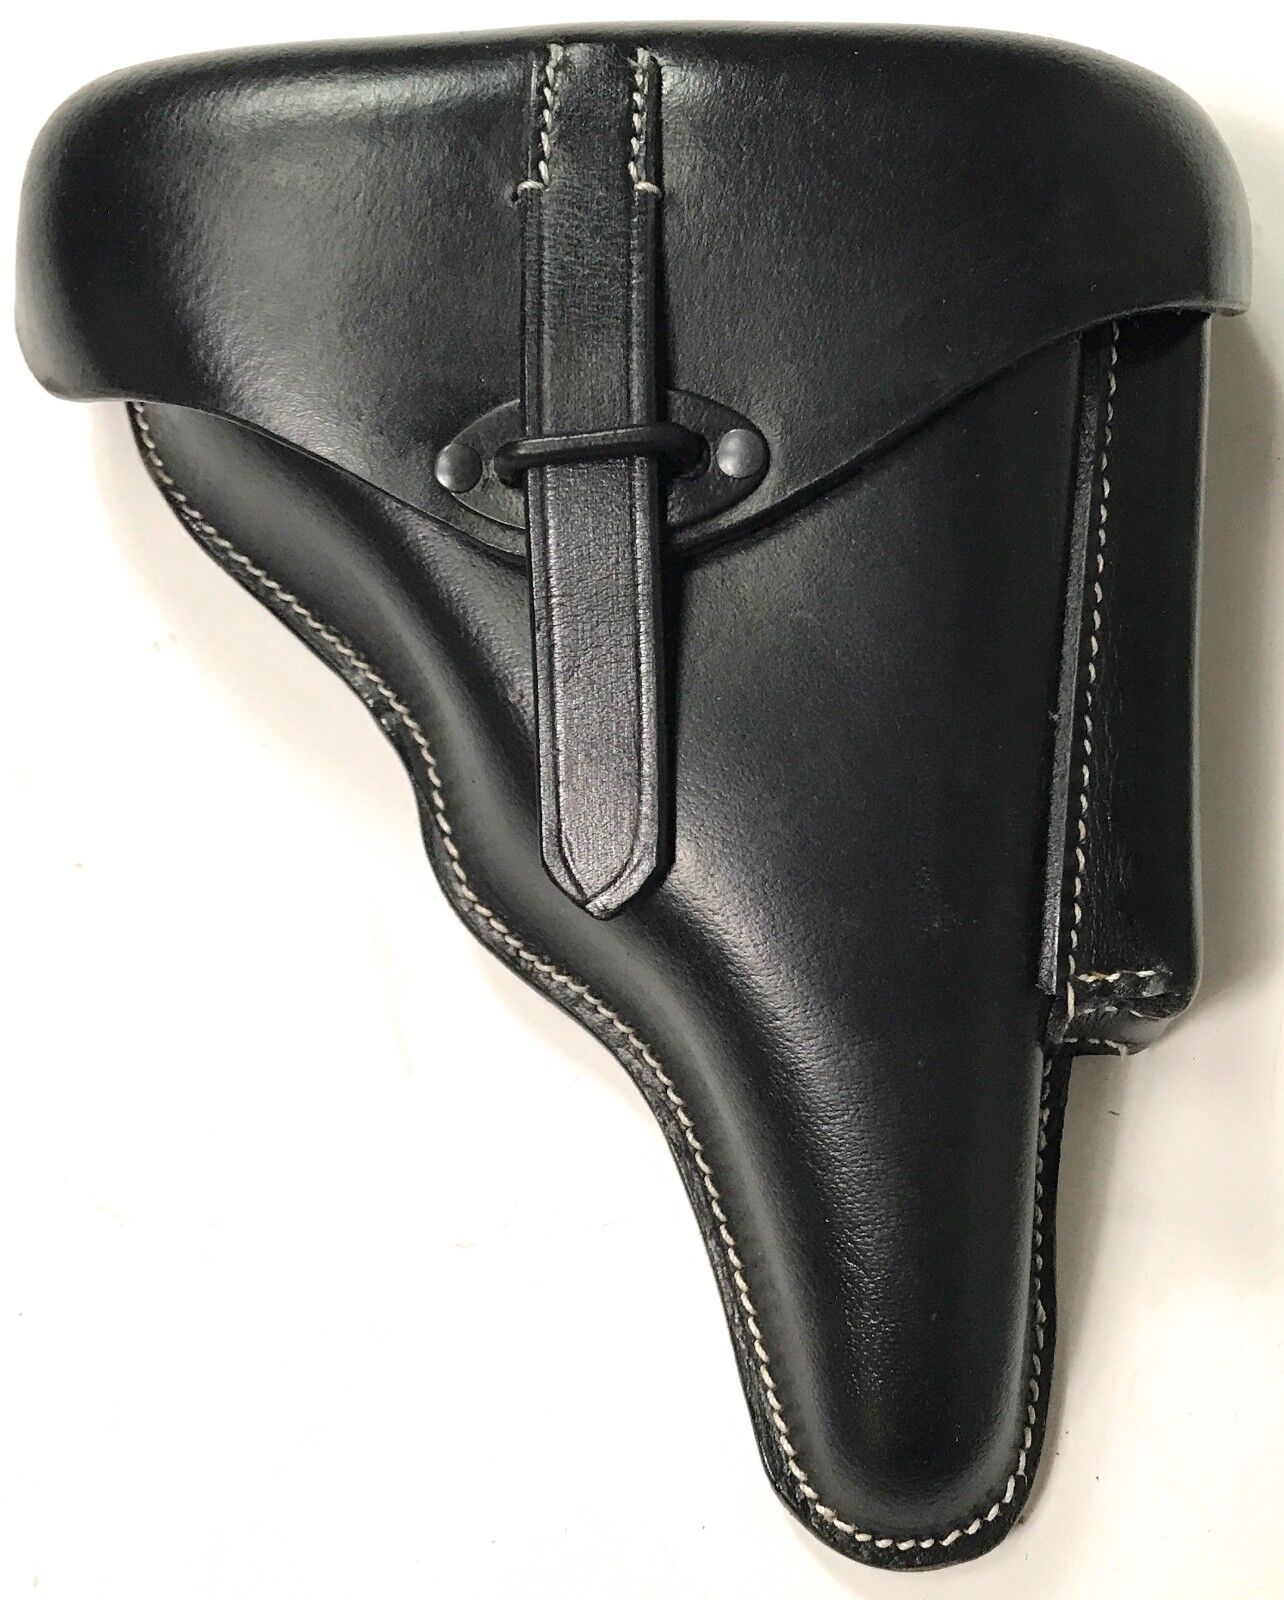 WWII GERMAN WALTHER P38 PISTOL HARD SHELL HOLSTER- BLACK LEATHER